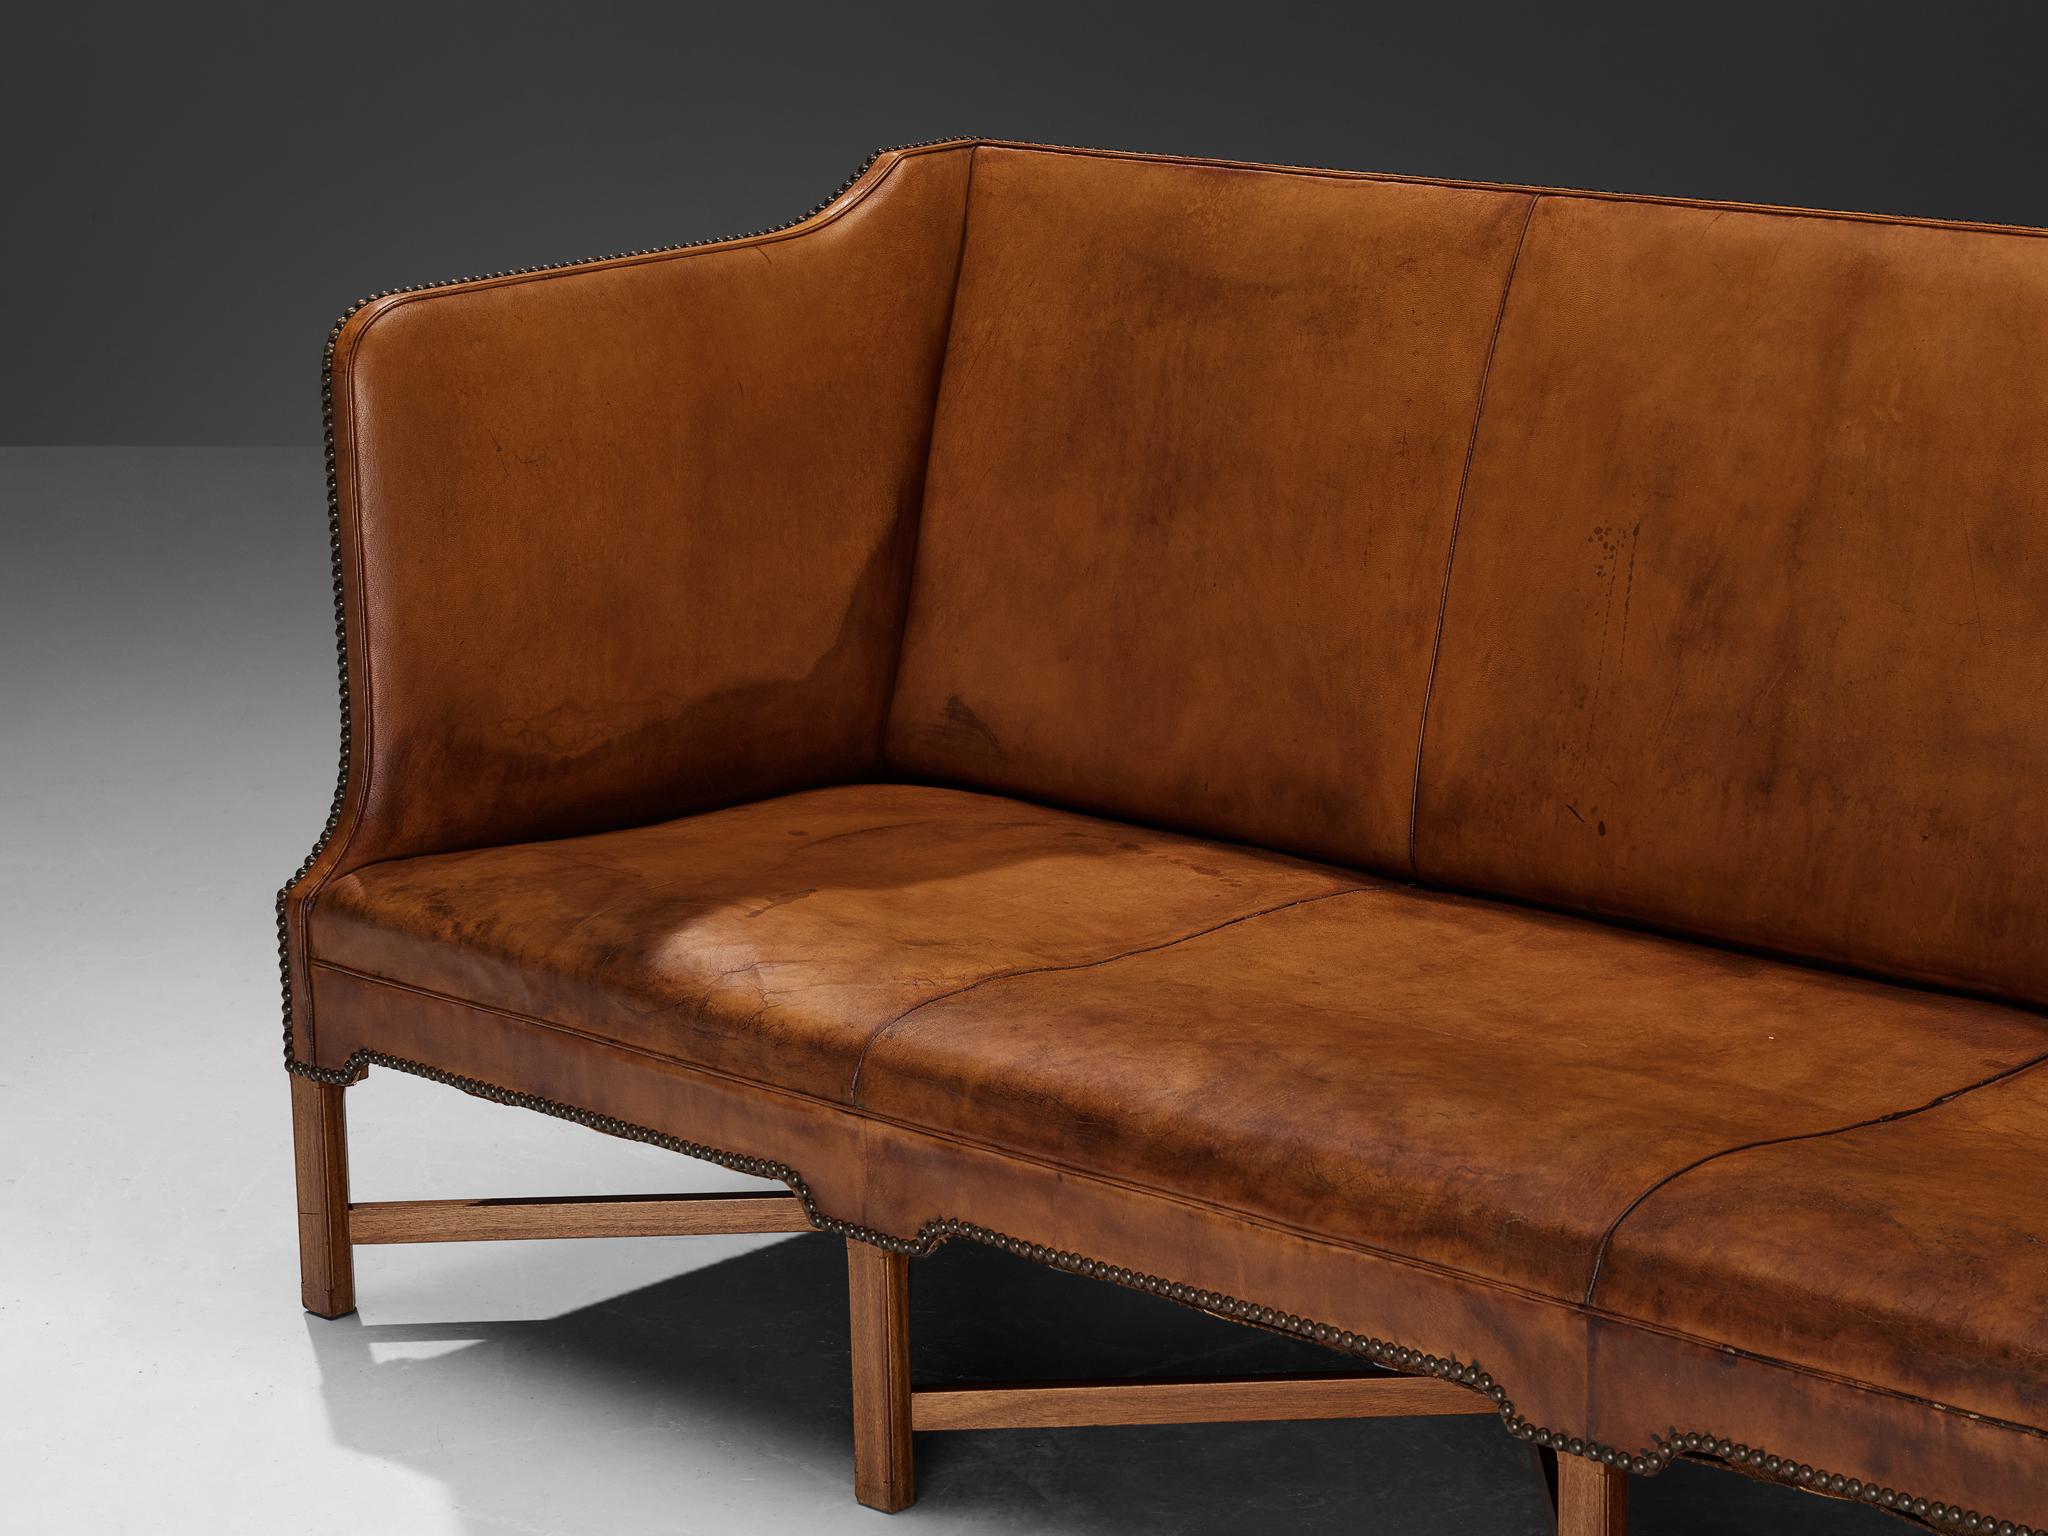 Brass Kaare Klint for Rud Rasmussen Sofa in Original Niger Leather and Mahogany  For Sale